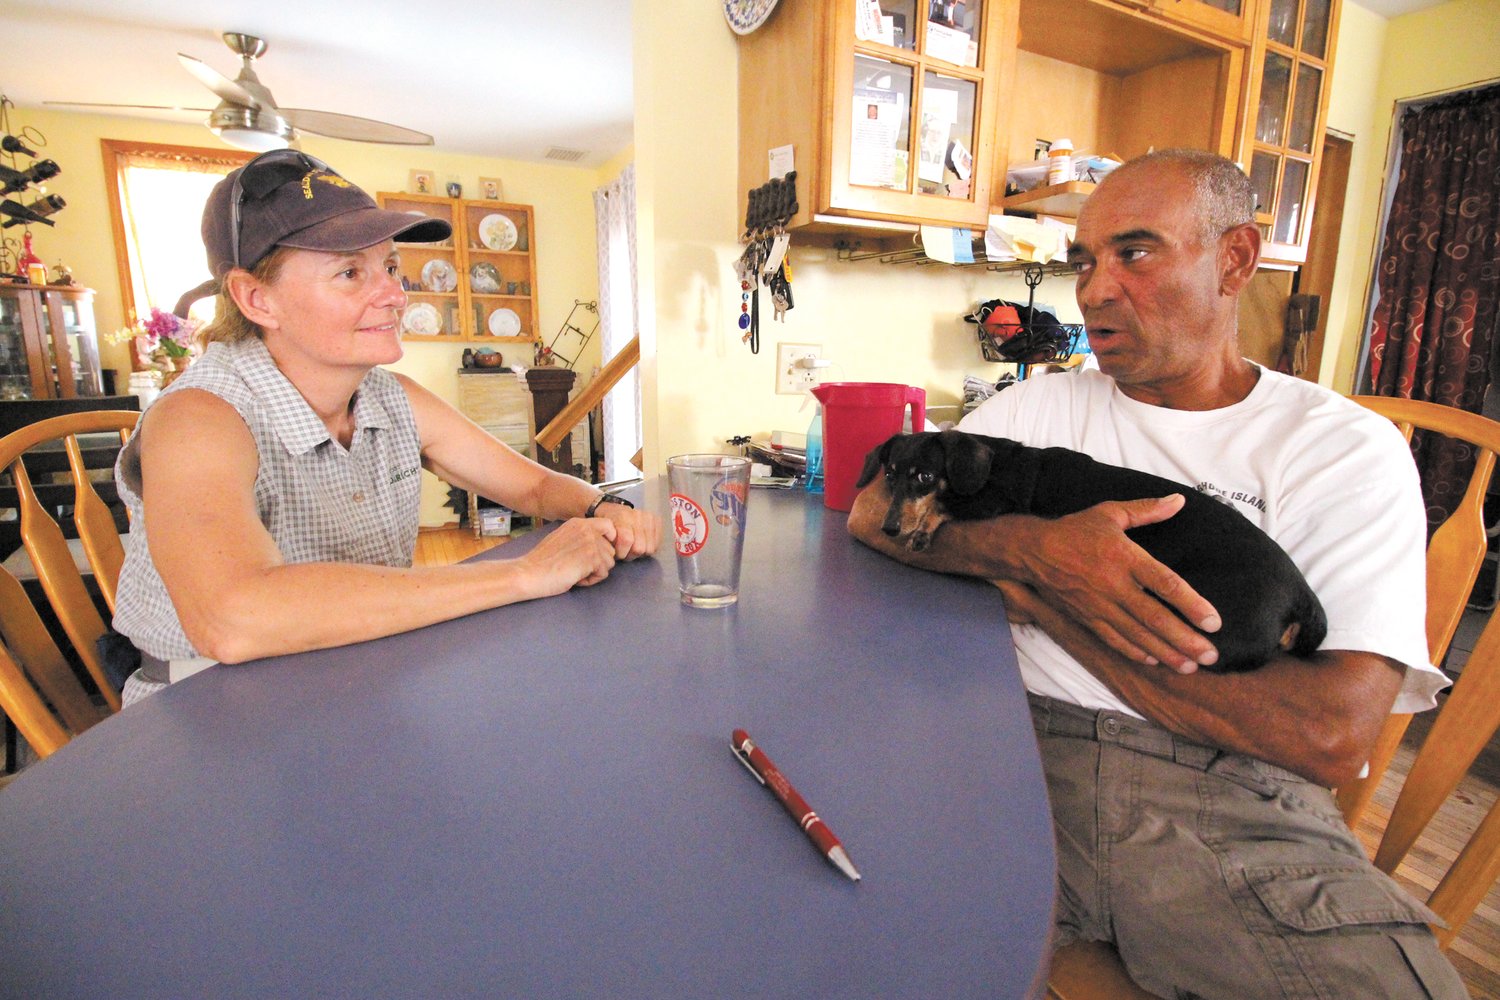 FEELING AT HOME: Filmmaker Karin Muller and Jody King of Warwick outline plans for a day of shooting at King’s kitchen counter. (Warwick Beacon photos)